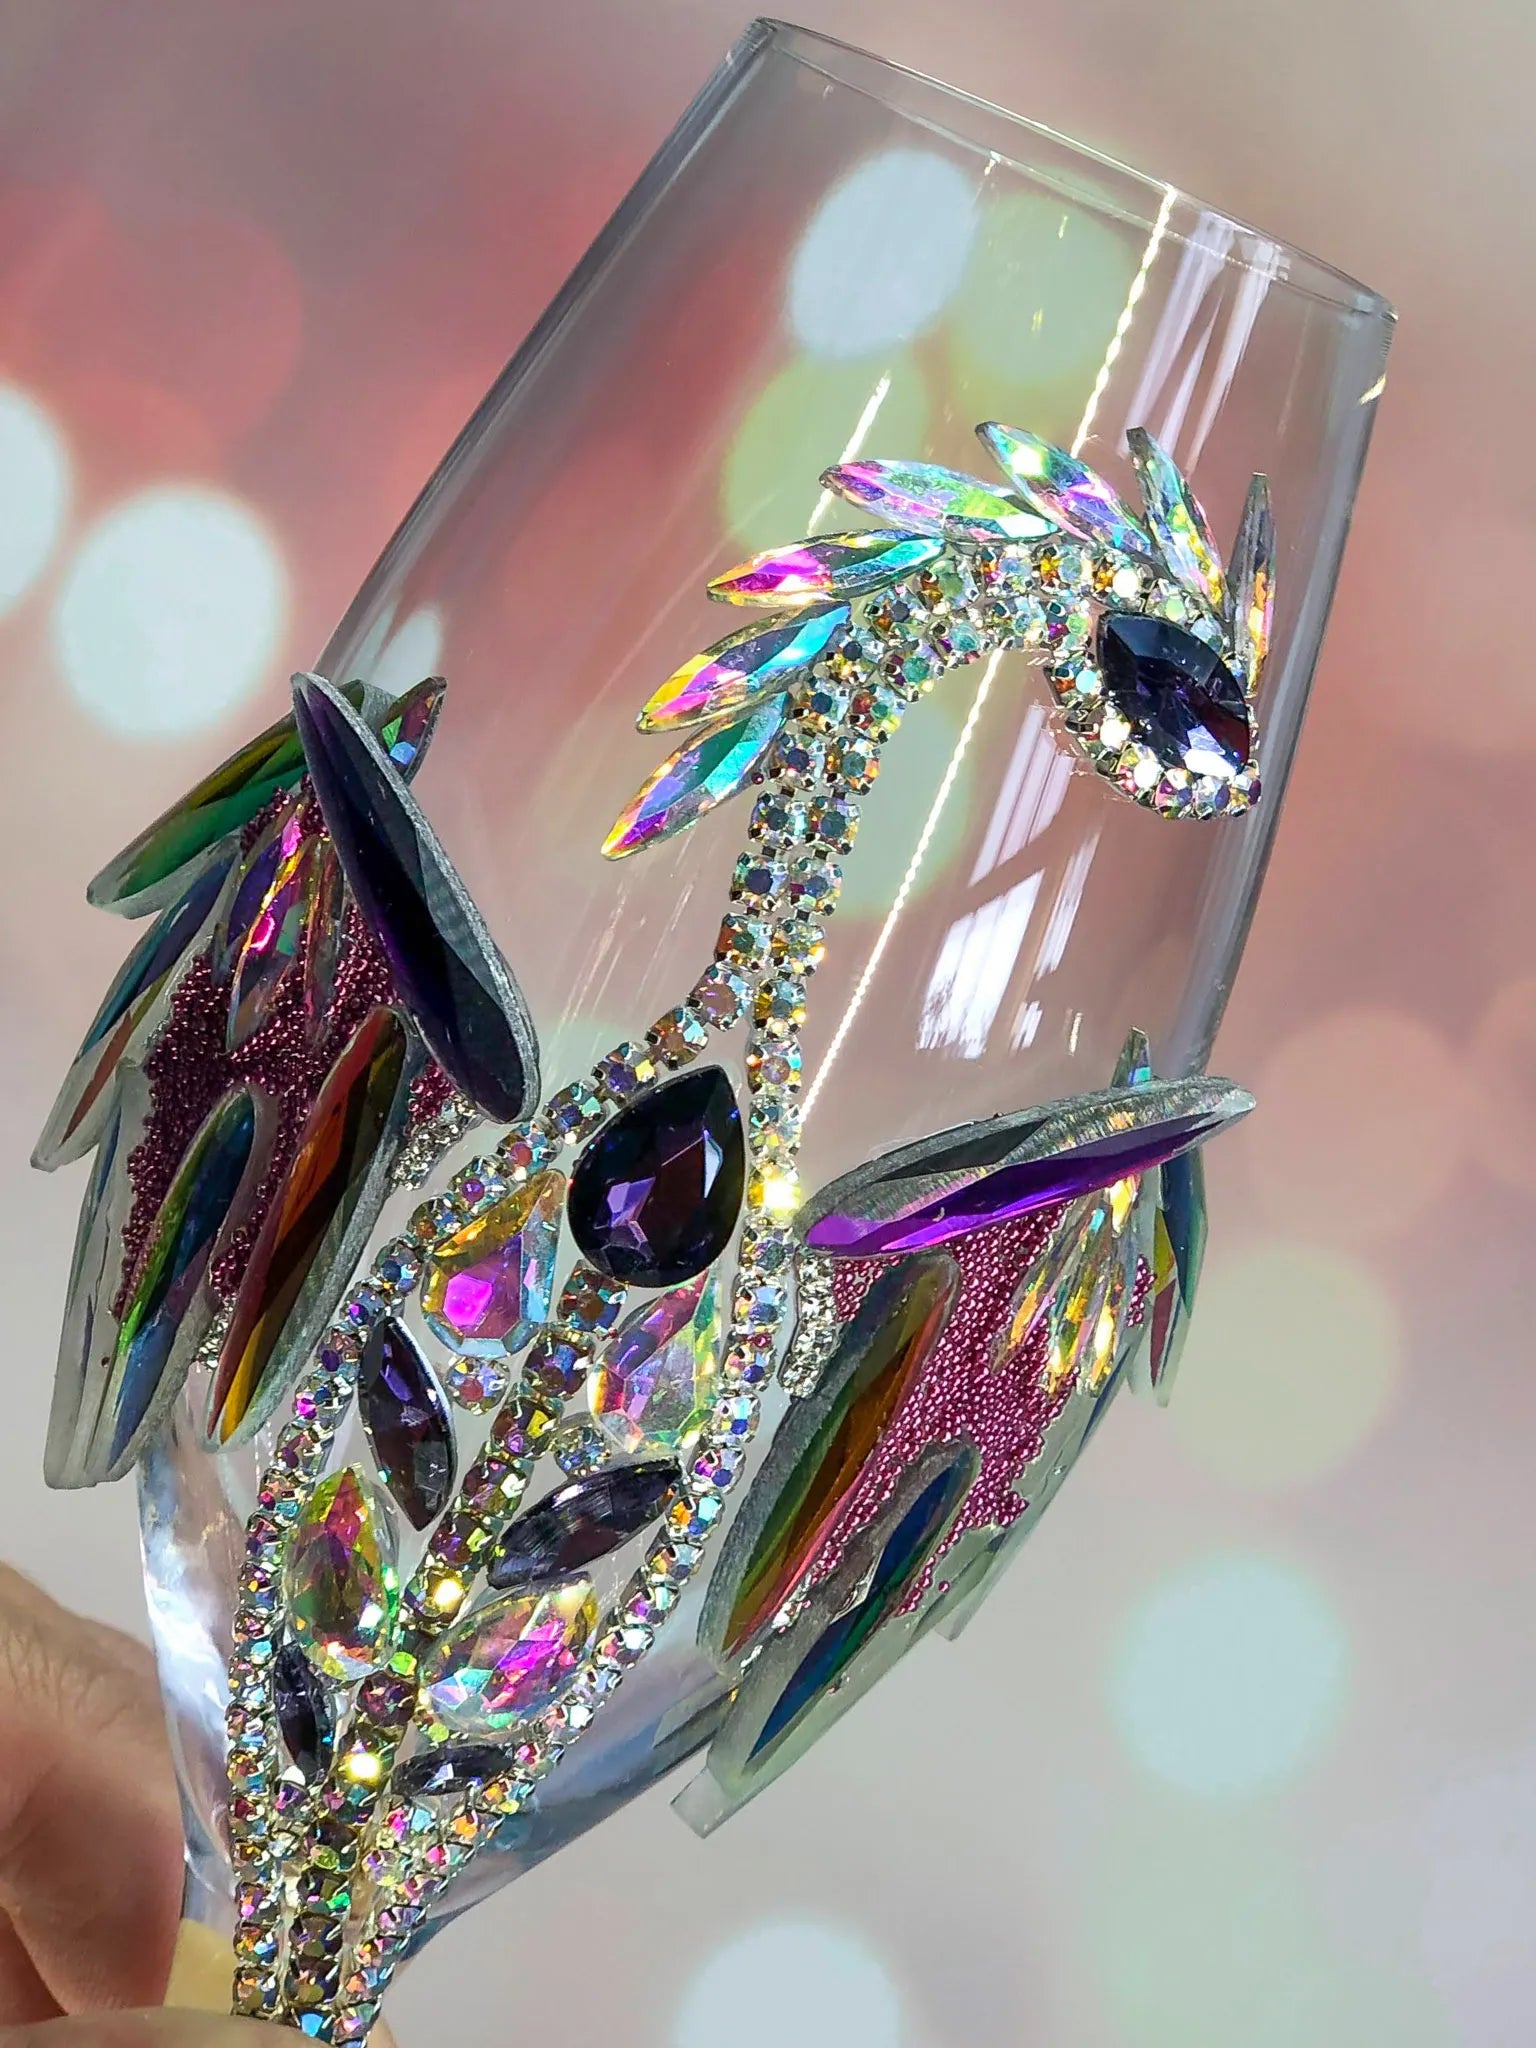 Close-up of a wineglass, highlighting intricate dragon designs studded with shimmering gemstones and a silver spiral stem.